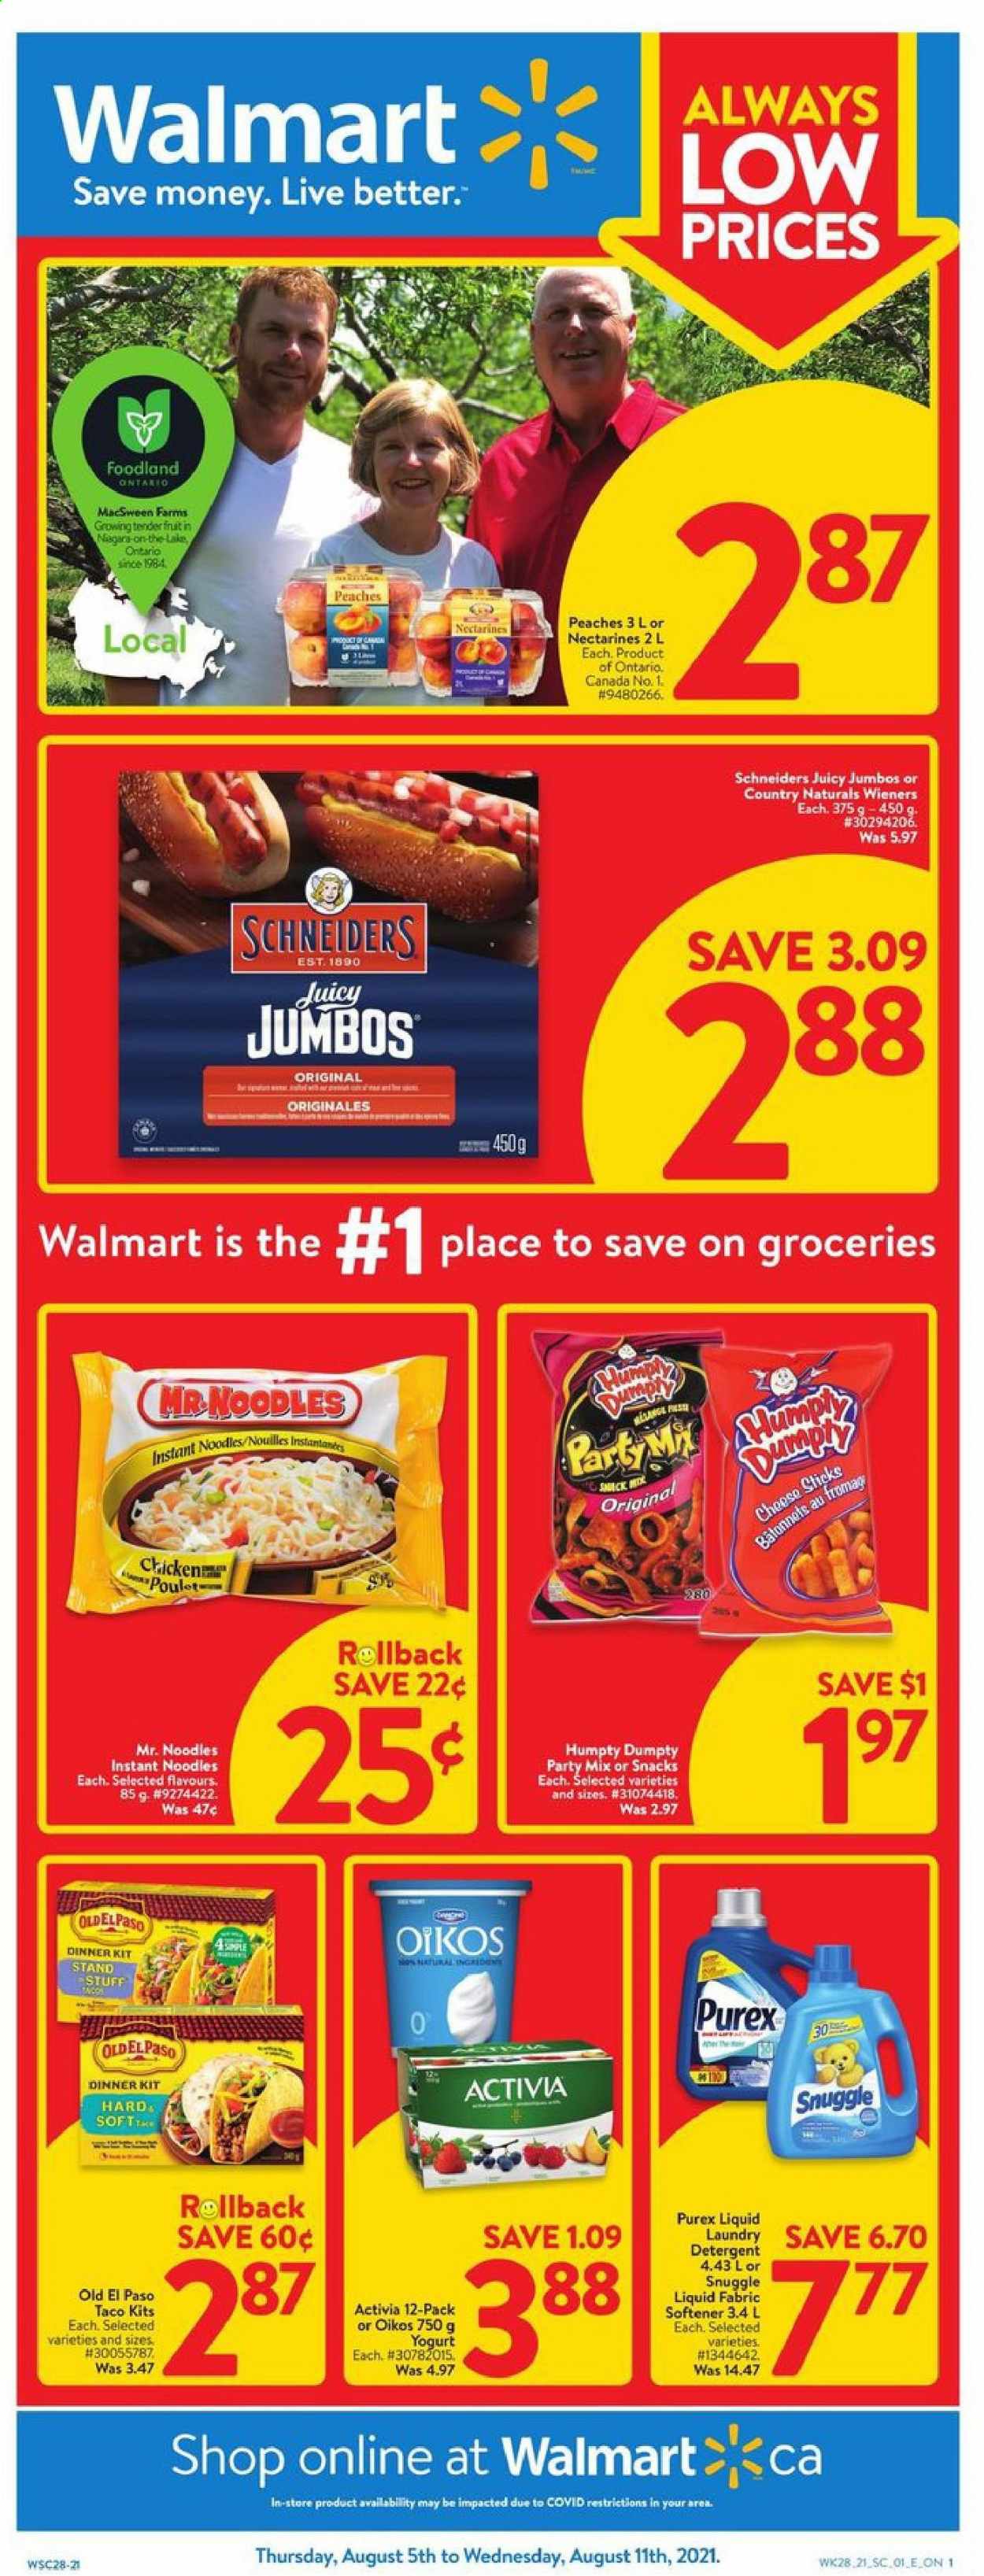 thumbnail - Walmart Flyer - August 05, 2021 - August 11, 2021 - Sales products - Old El Paso, nectarines, peaches, instant noodles, dinner kit, noodles, cheese, yoghurt, Activia, Oikos, L'Or, Snuggle, fabric softener, Purex. Page 1.